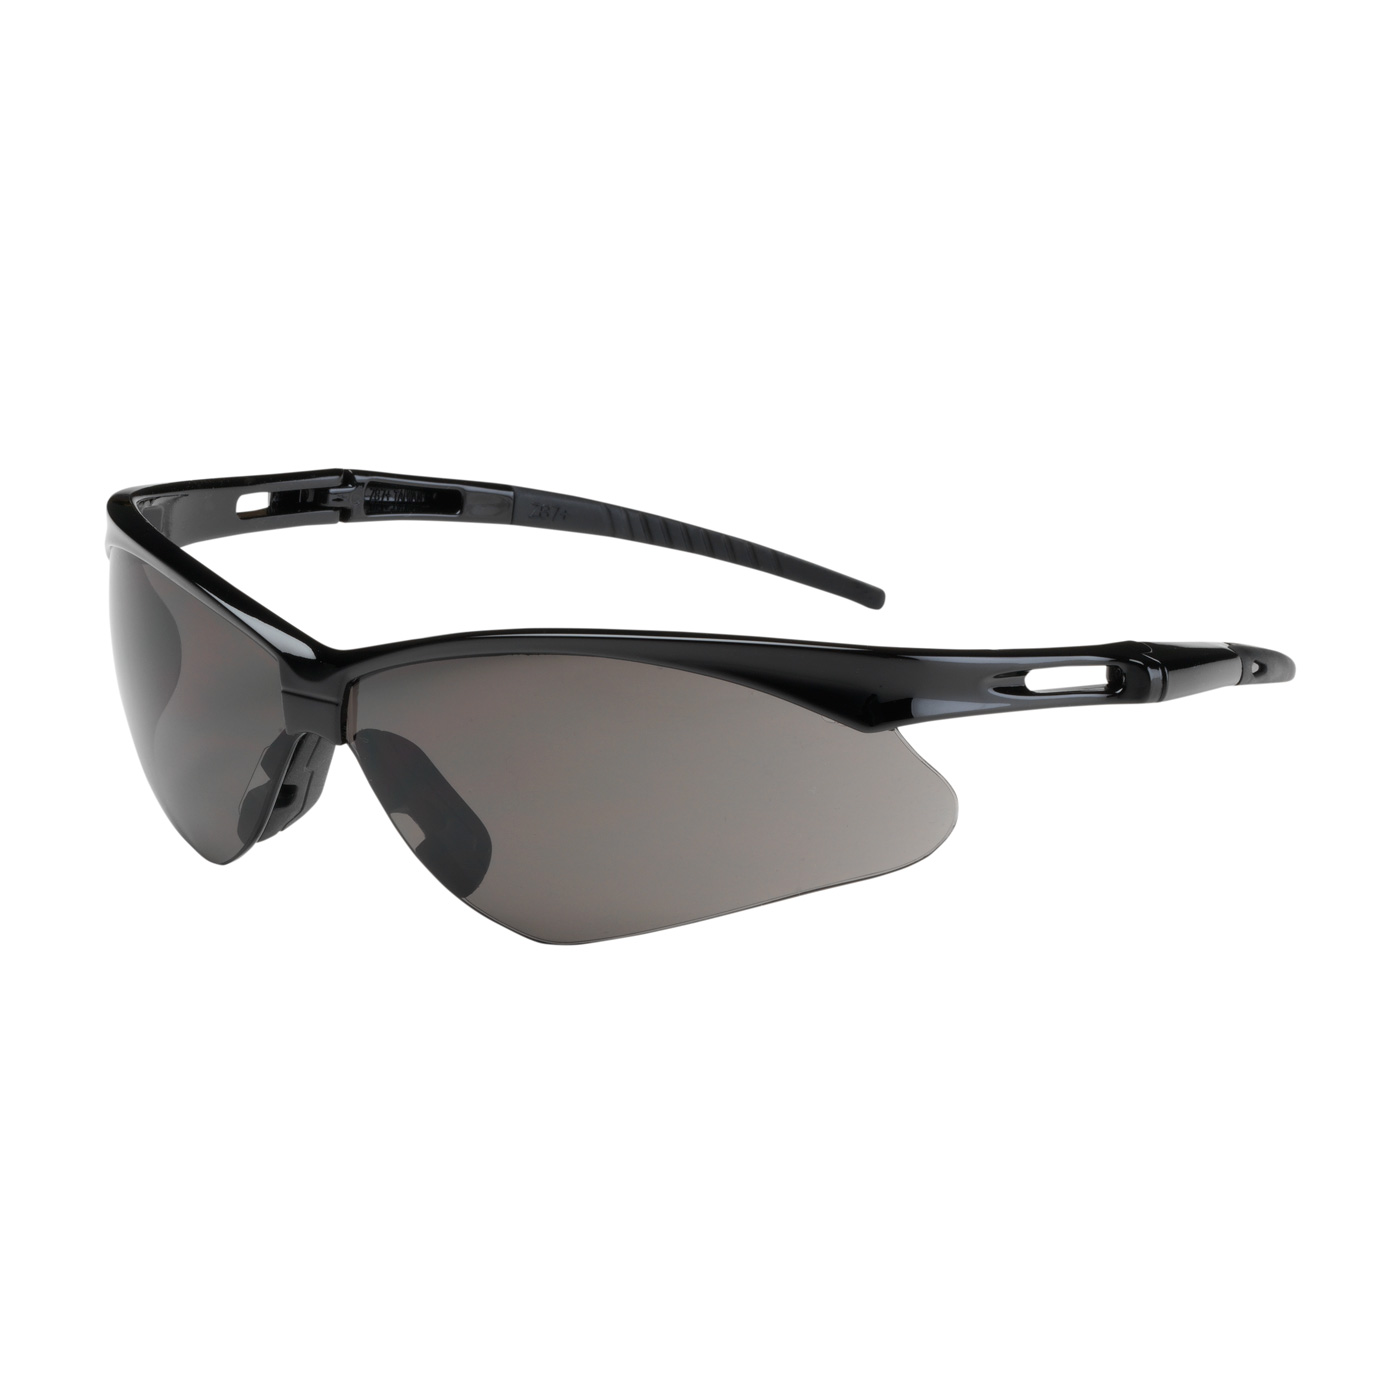 PIP 250-AN-10521 Anser Semi-Rimless Safety Glasses with Black Frame, Gray Lens and Anti-Scratch Coating PID-250AN10521